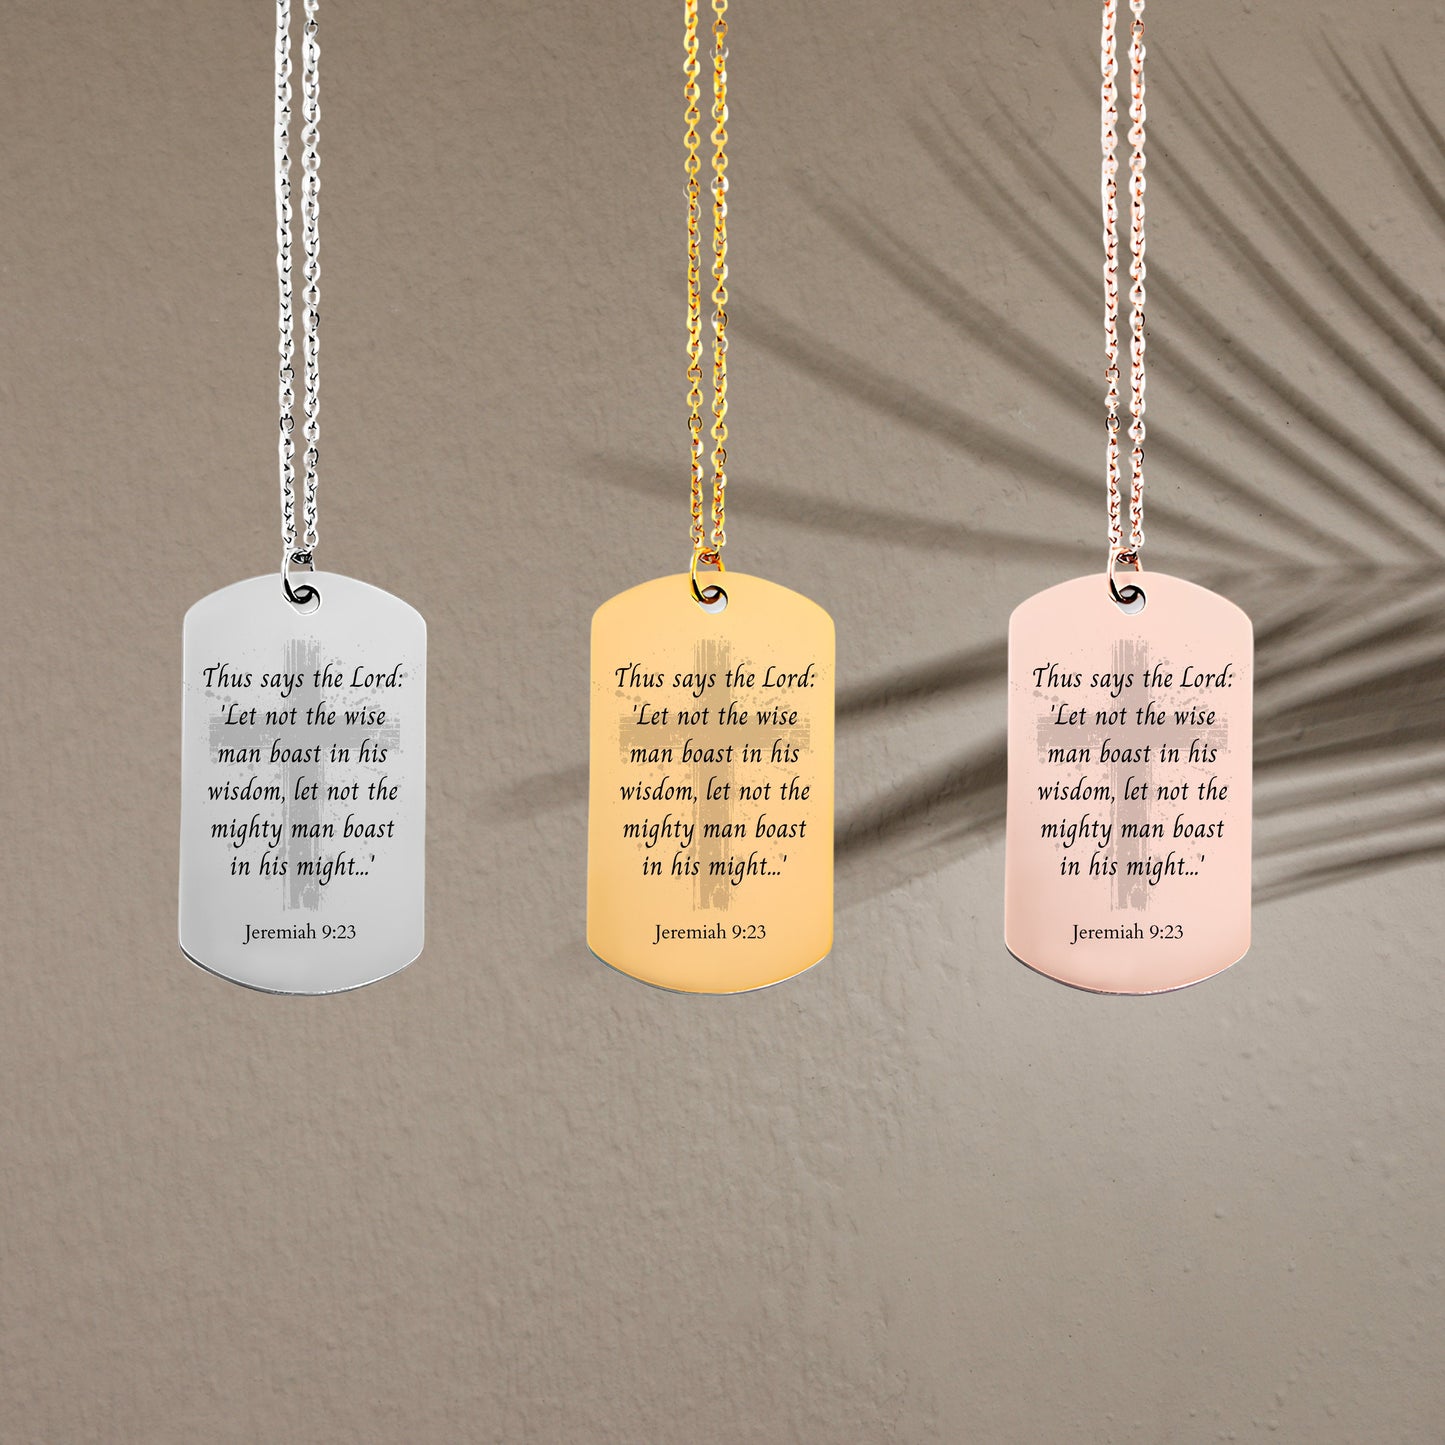 Jeremiah 9 23 quote necklace, gold bible verse, 14k gold cross charm necklace, confirmation gift, gold bar tag necklace,religious scripture